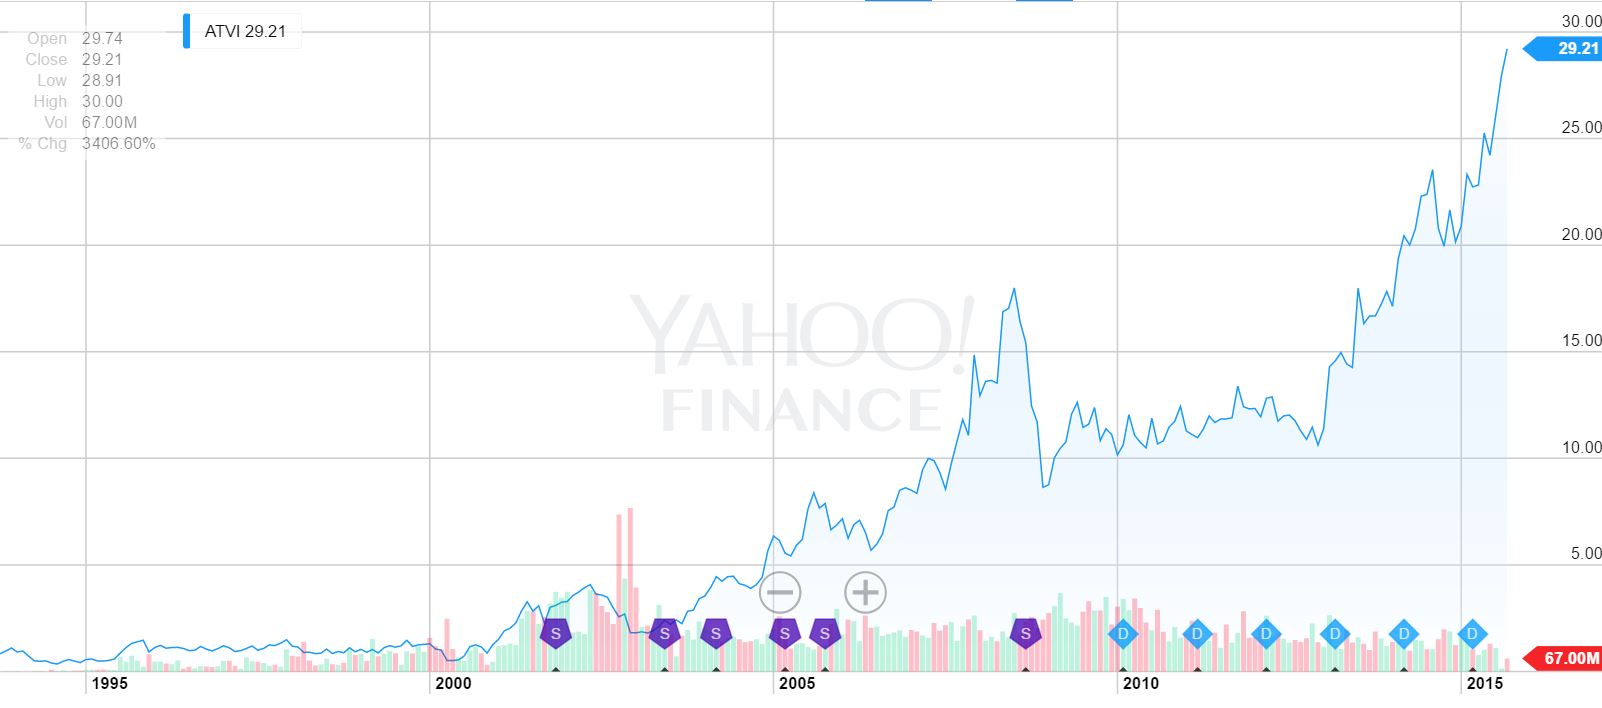 Activision Blizzard added to S&P 500 Stock Index: Worth $21B